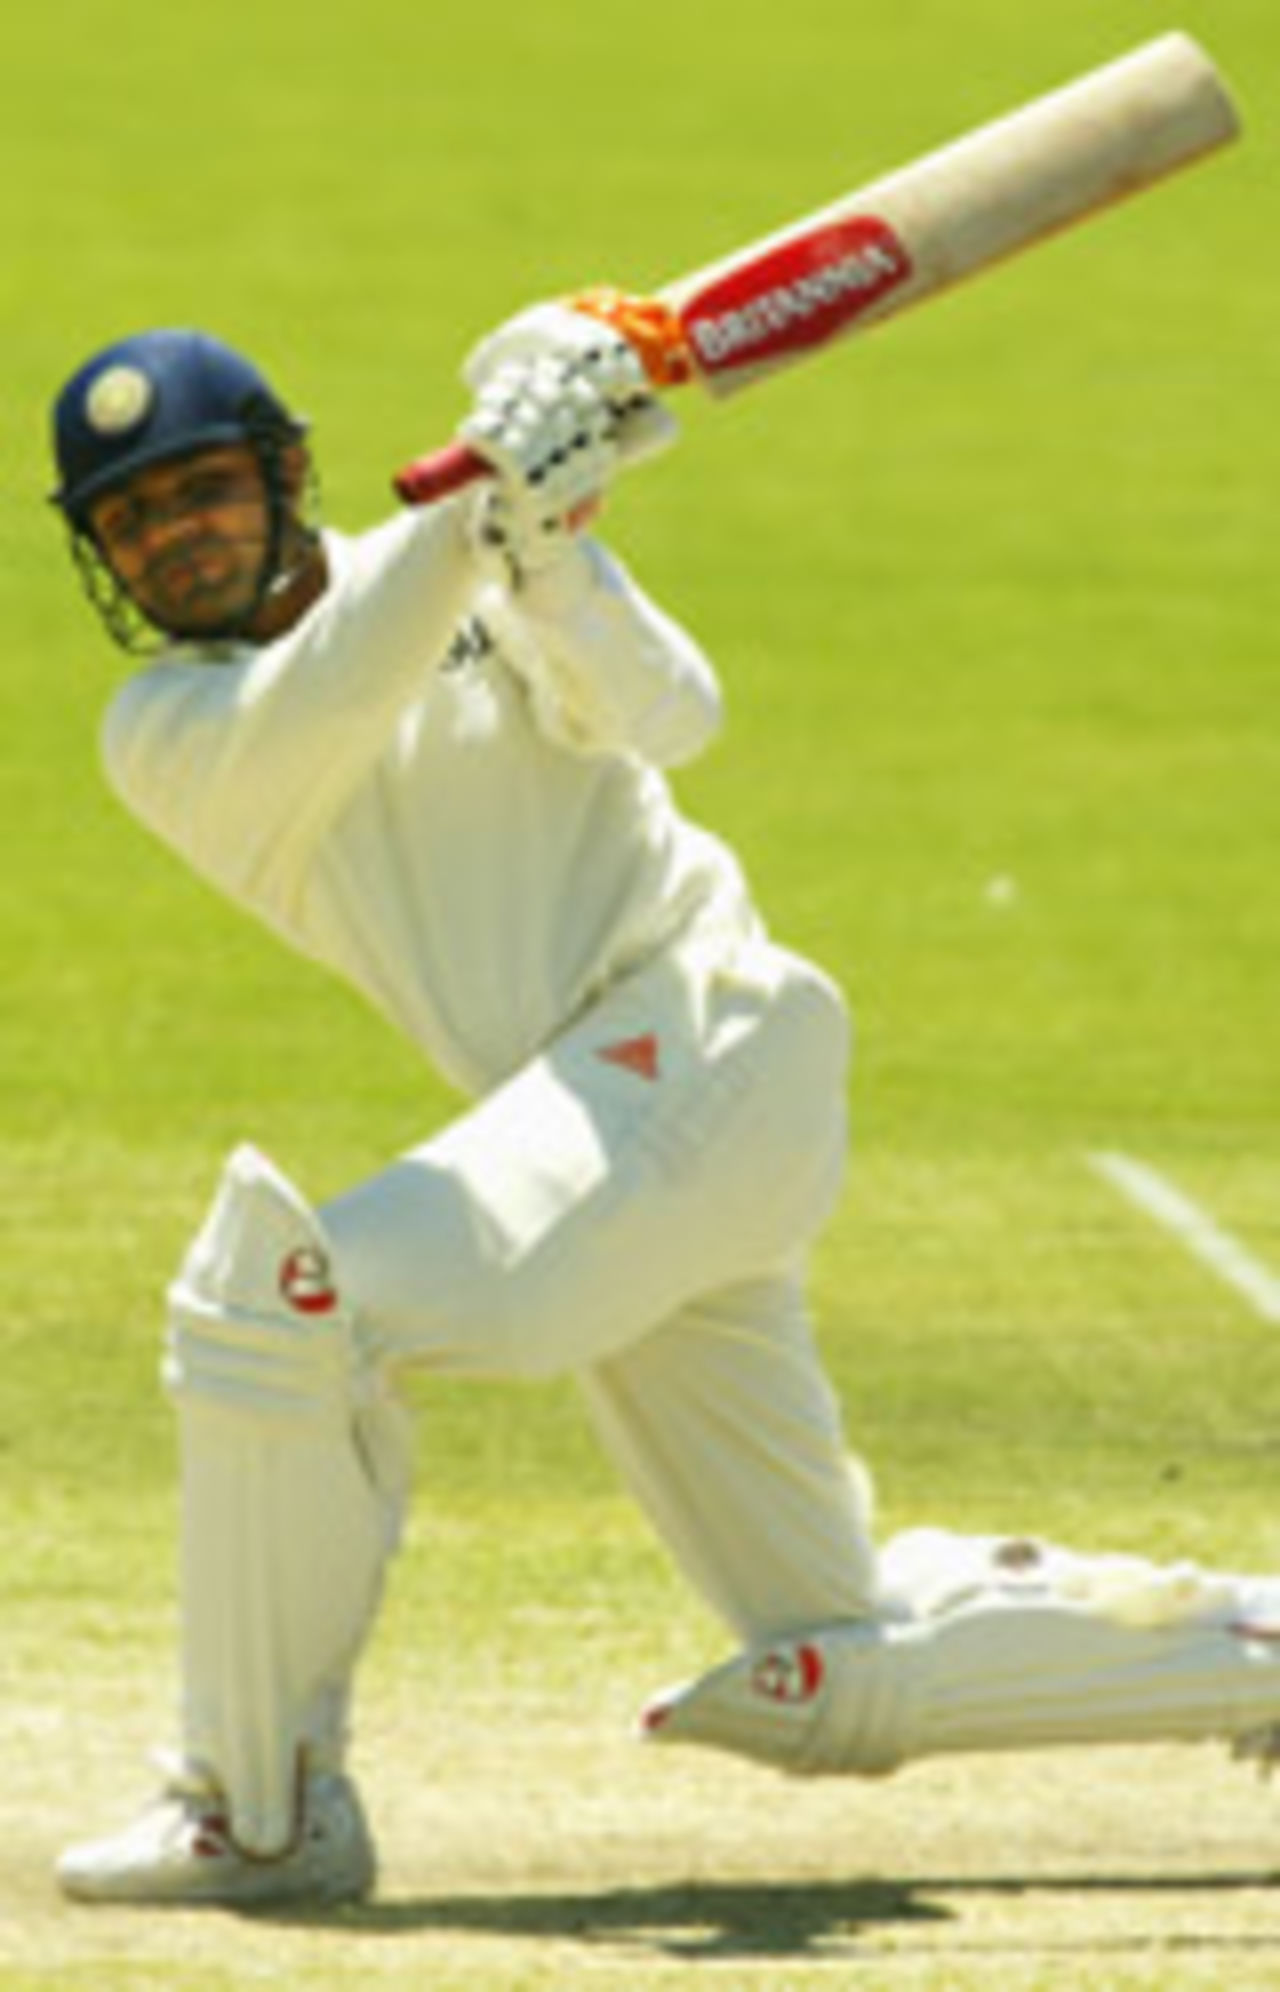 Sehwag flicks the ball to the leg side, Australia v India, 2nd Test, Adelaide, 5th day, Dec 15, 2003